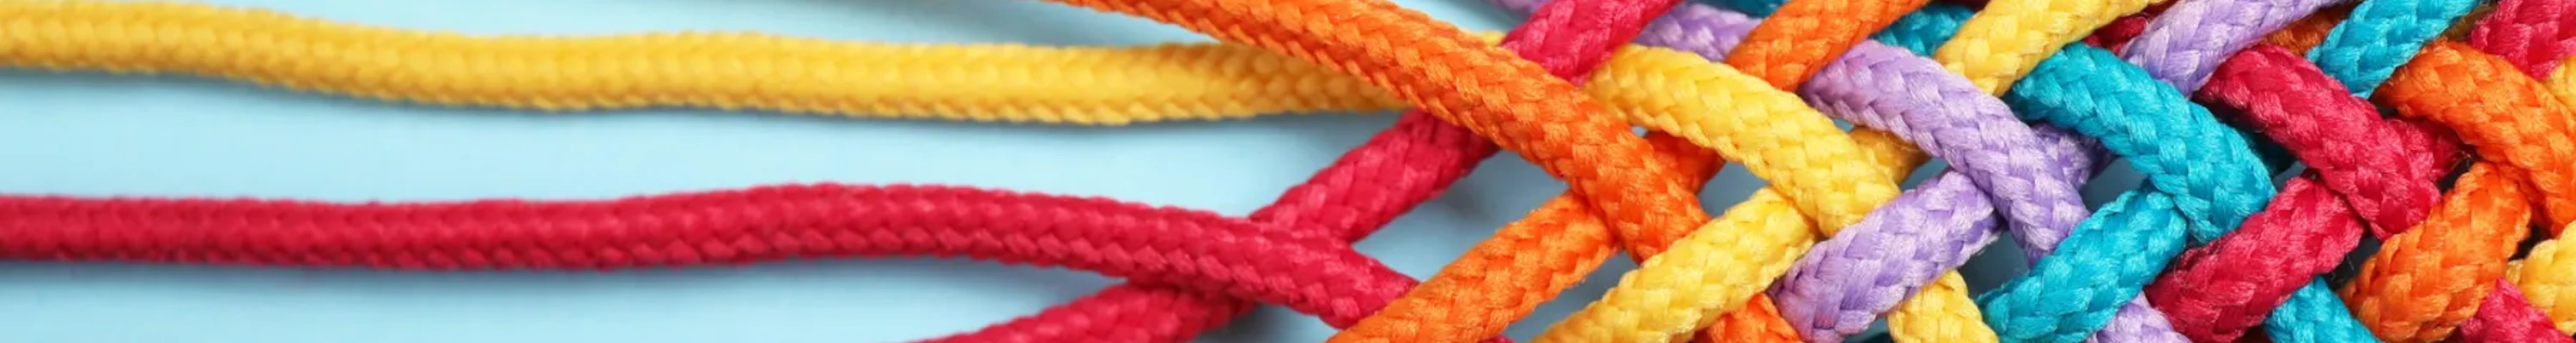 intertwined colorful ropes